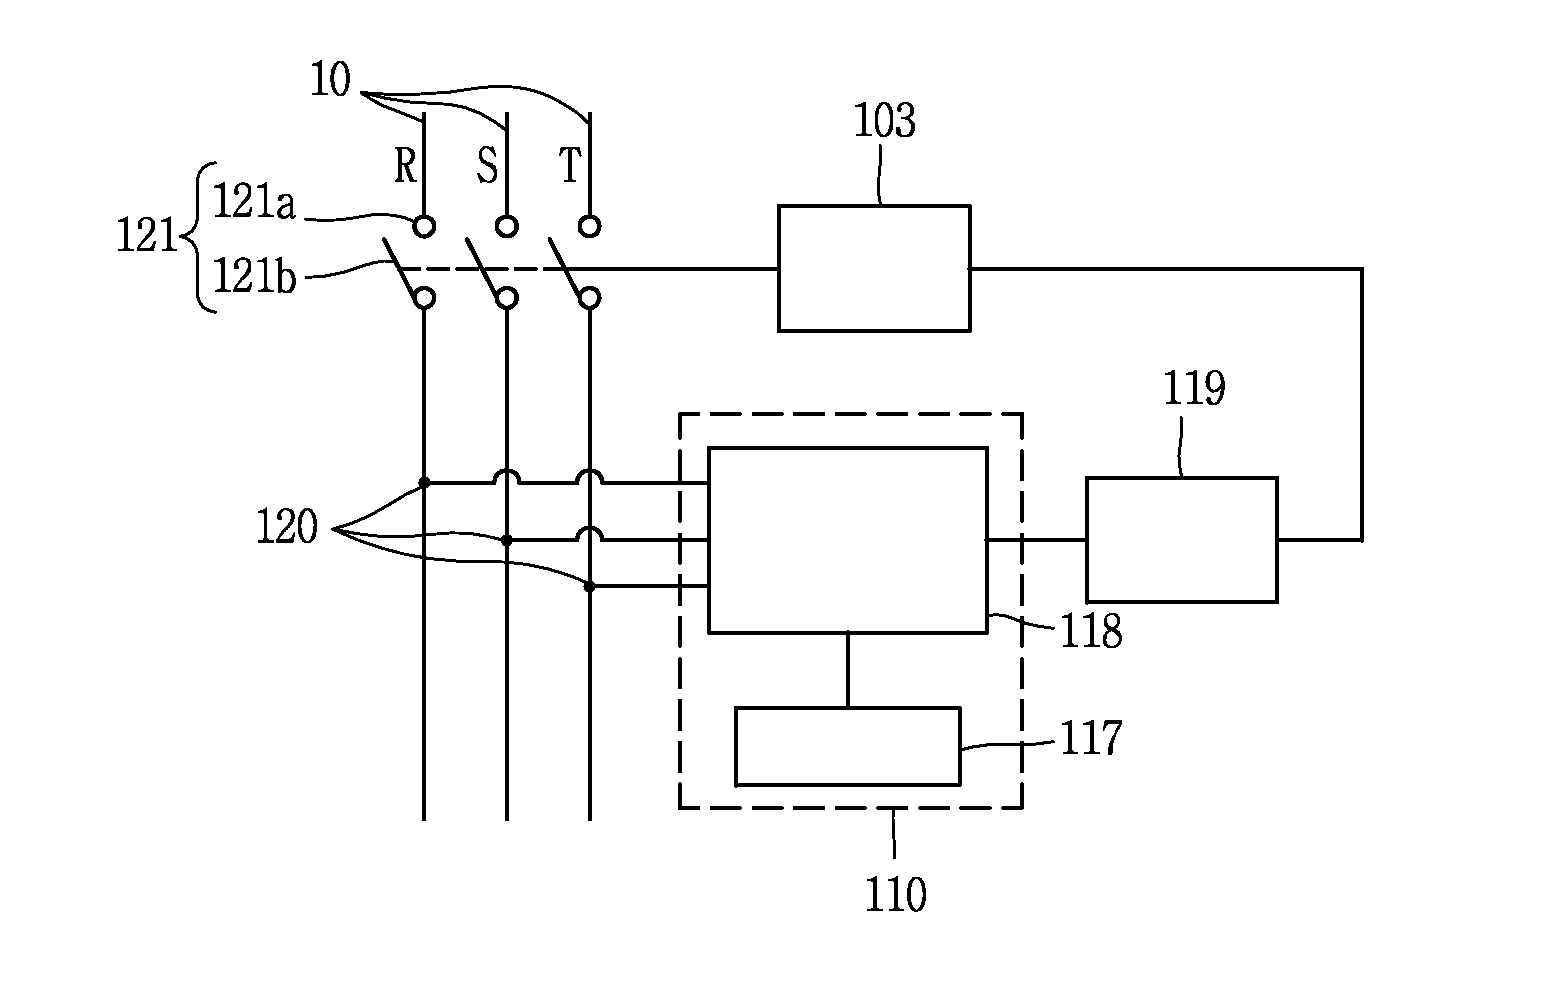 Overcurrent relay and molded case circuit breaker with the same